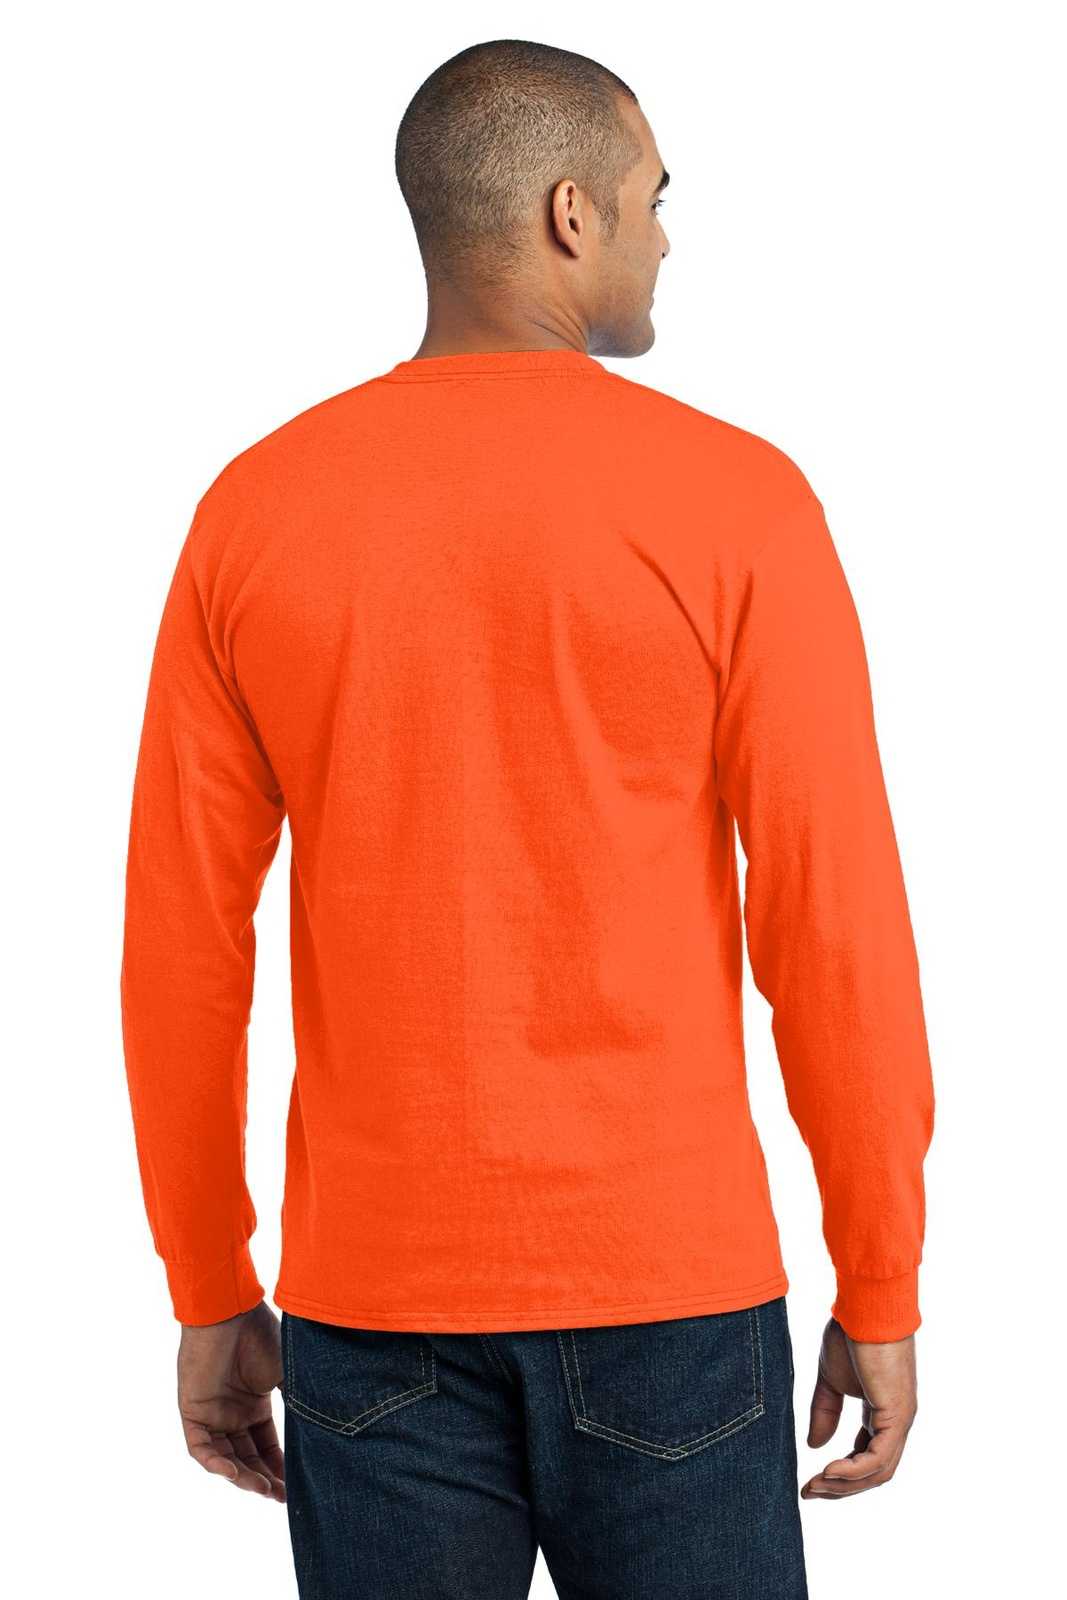 Port &amp; Company PC55LS Long Sleeve Core Blend Tee - Safety Orange - HIT a Double - 2